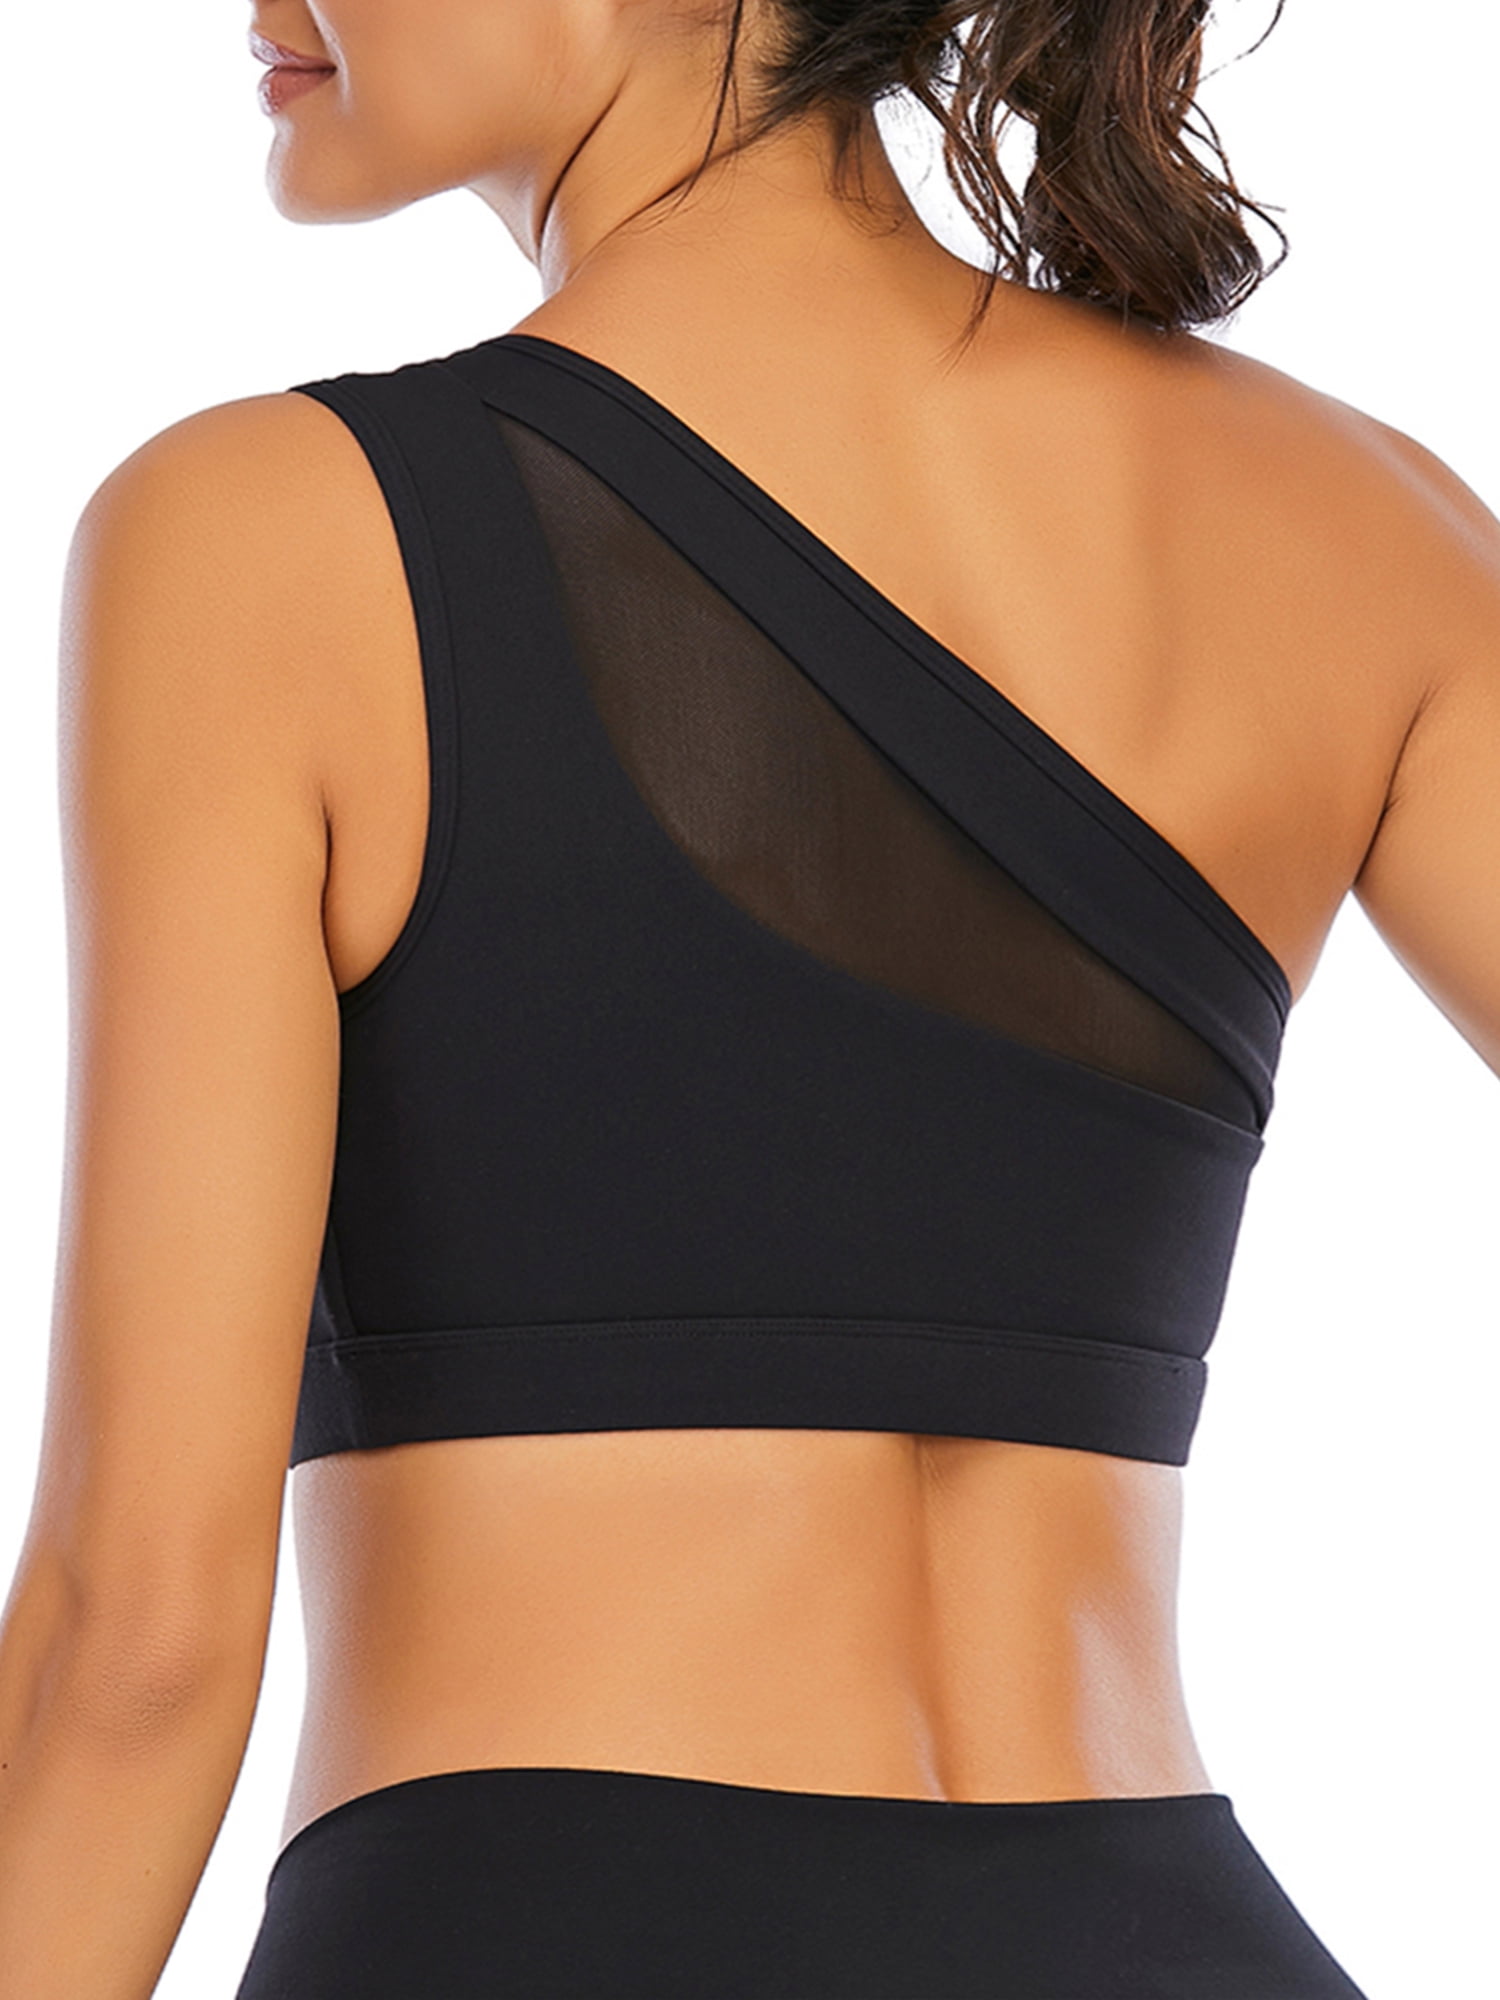 Womens One Shoulder Sports Bra Workout Tops Cute Yoga Bra Medium Support for Running Athletic Gym Fitness Walmart.com